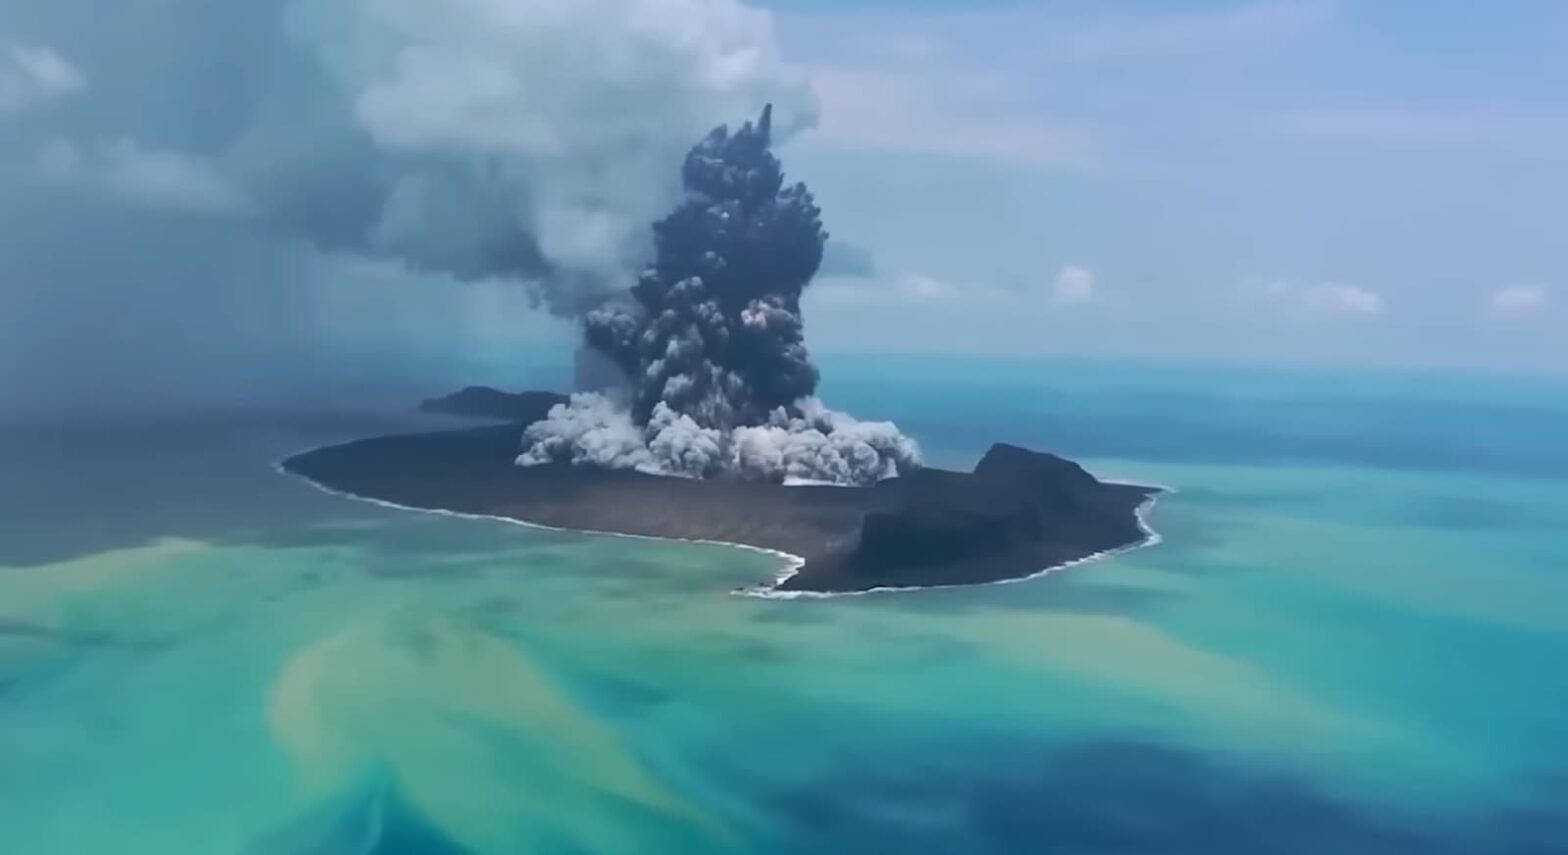 A volcanic eruption on an island surrounded by blue waters